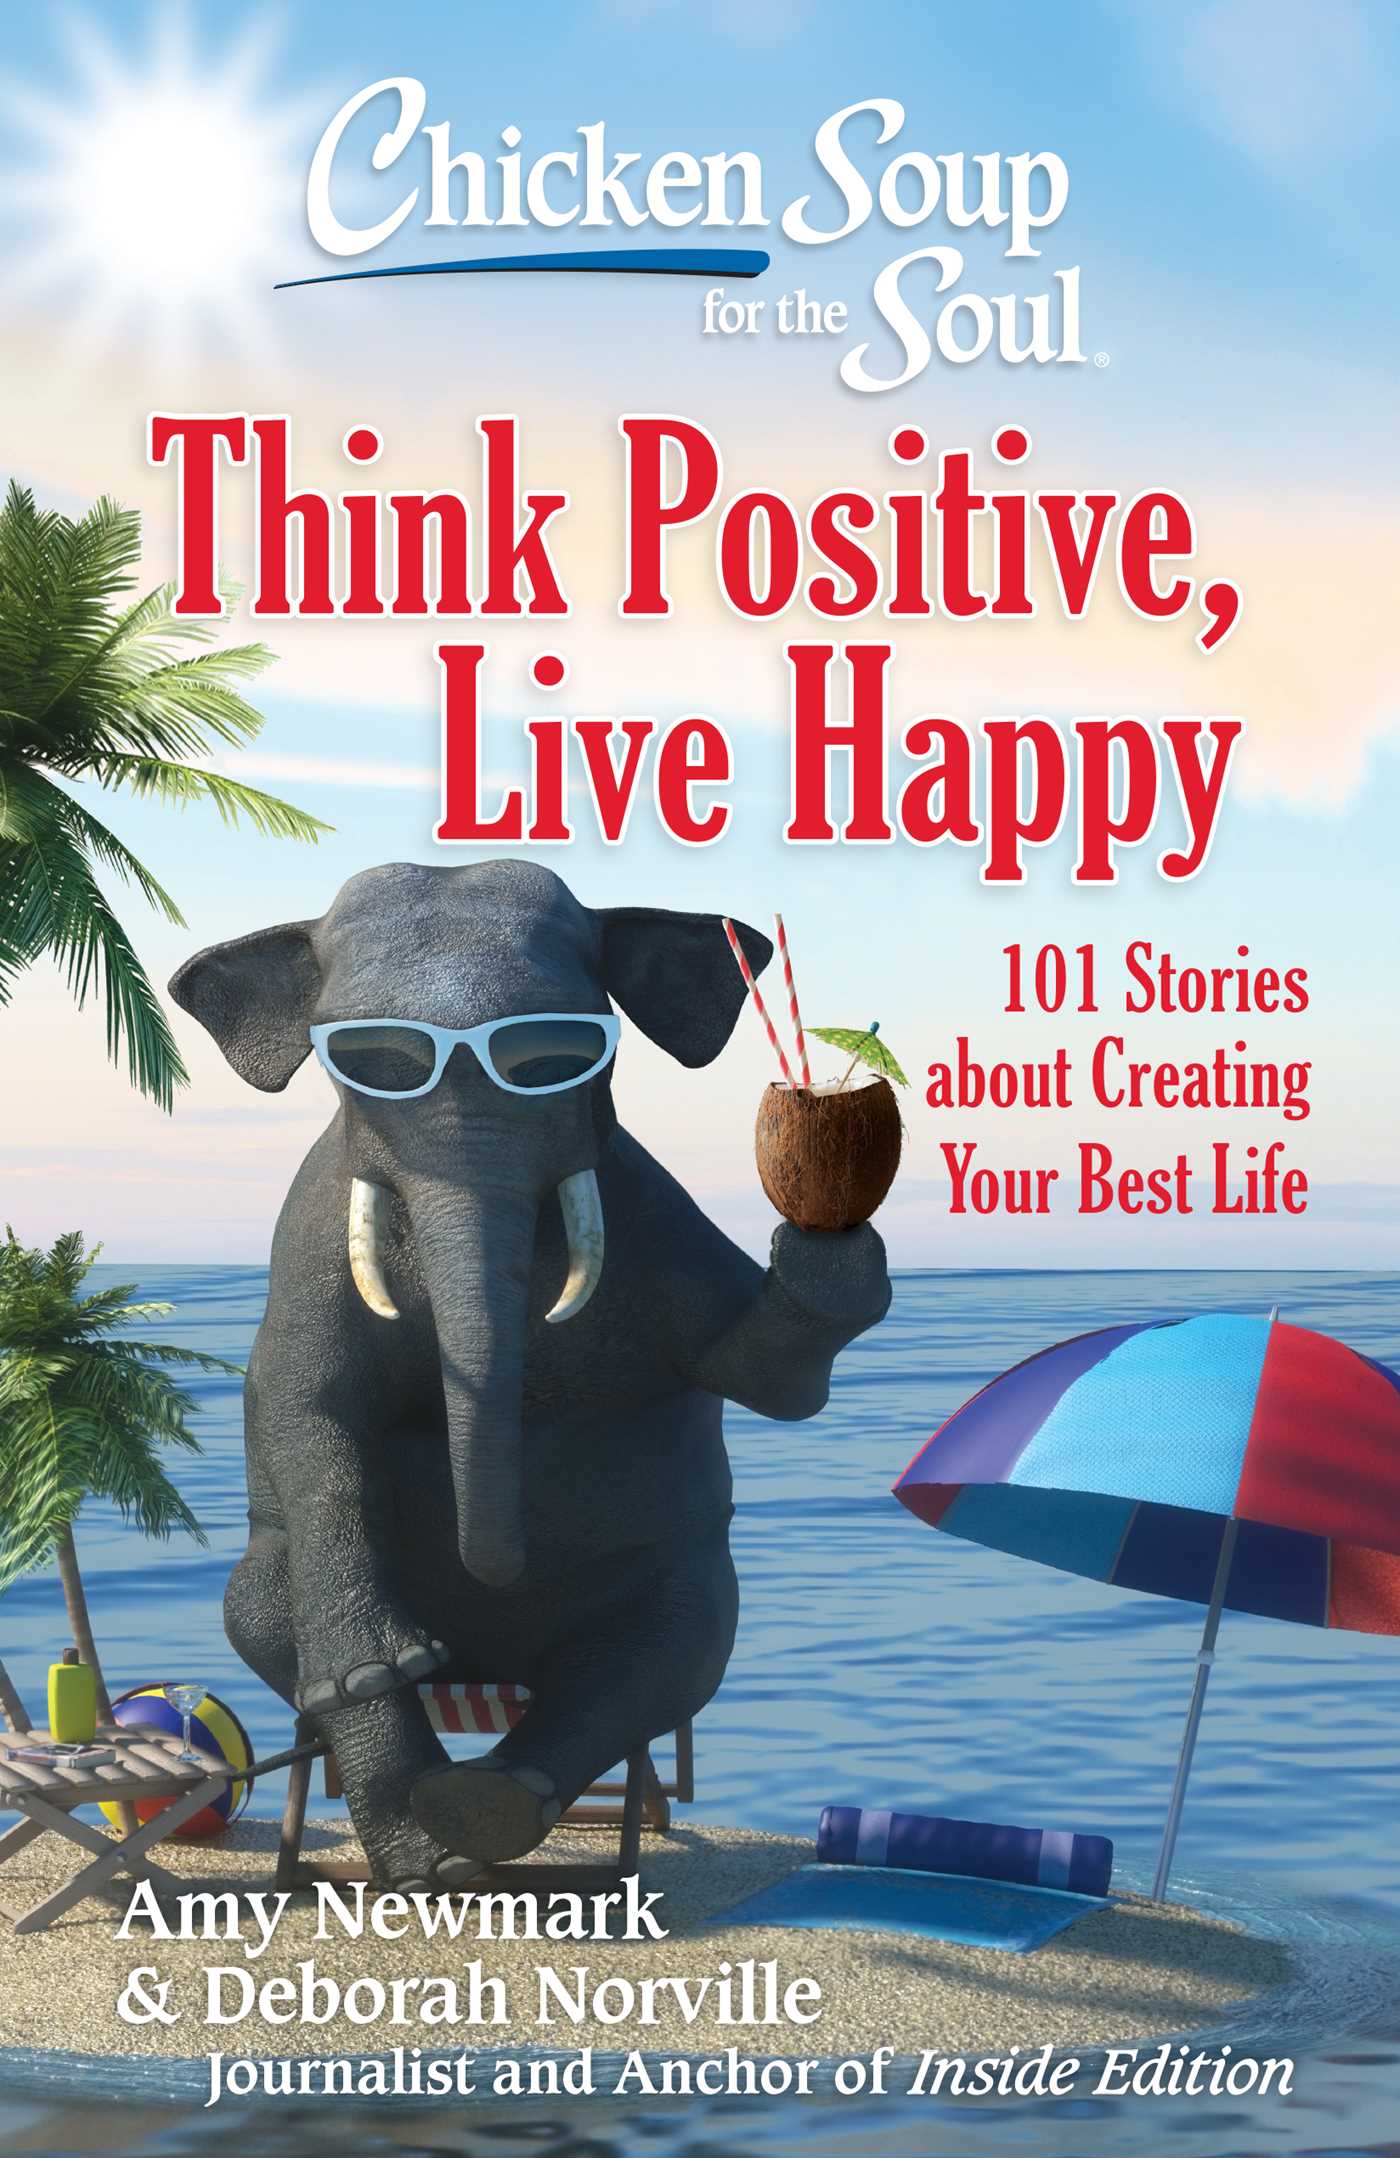 Chicken Soup for the Soul: Think Positive, Live Happy